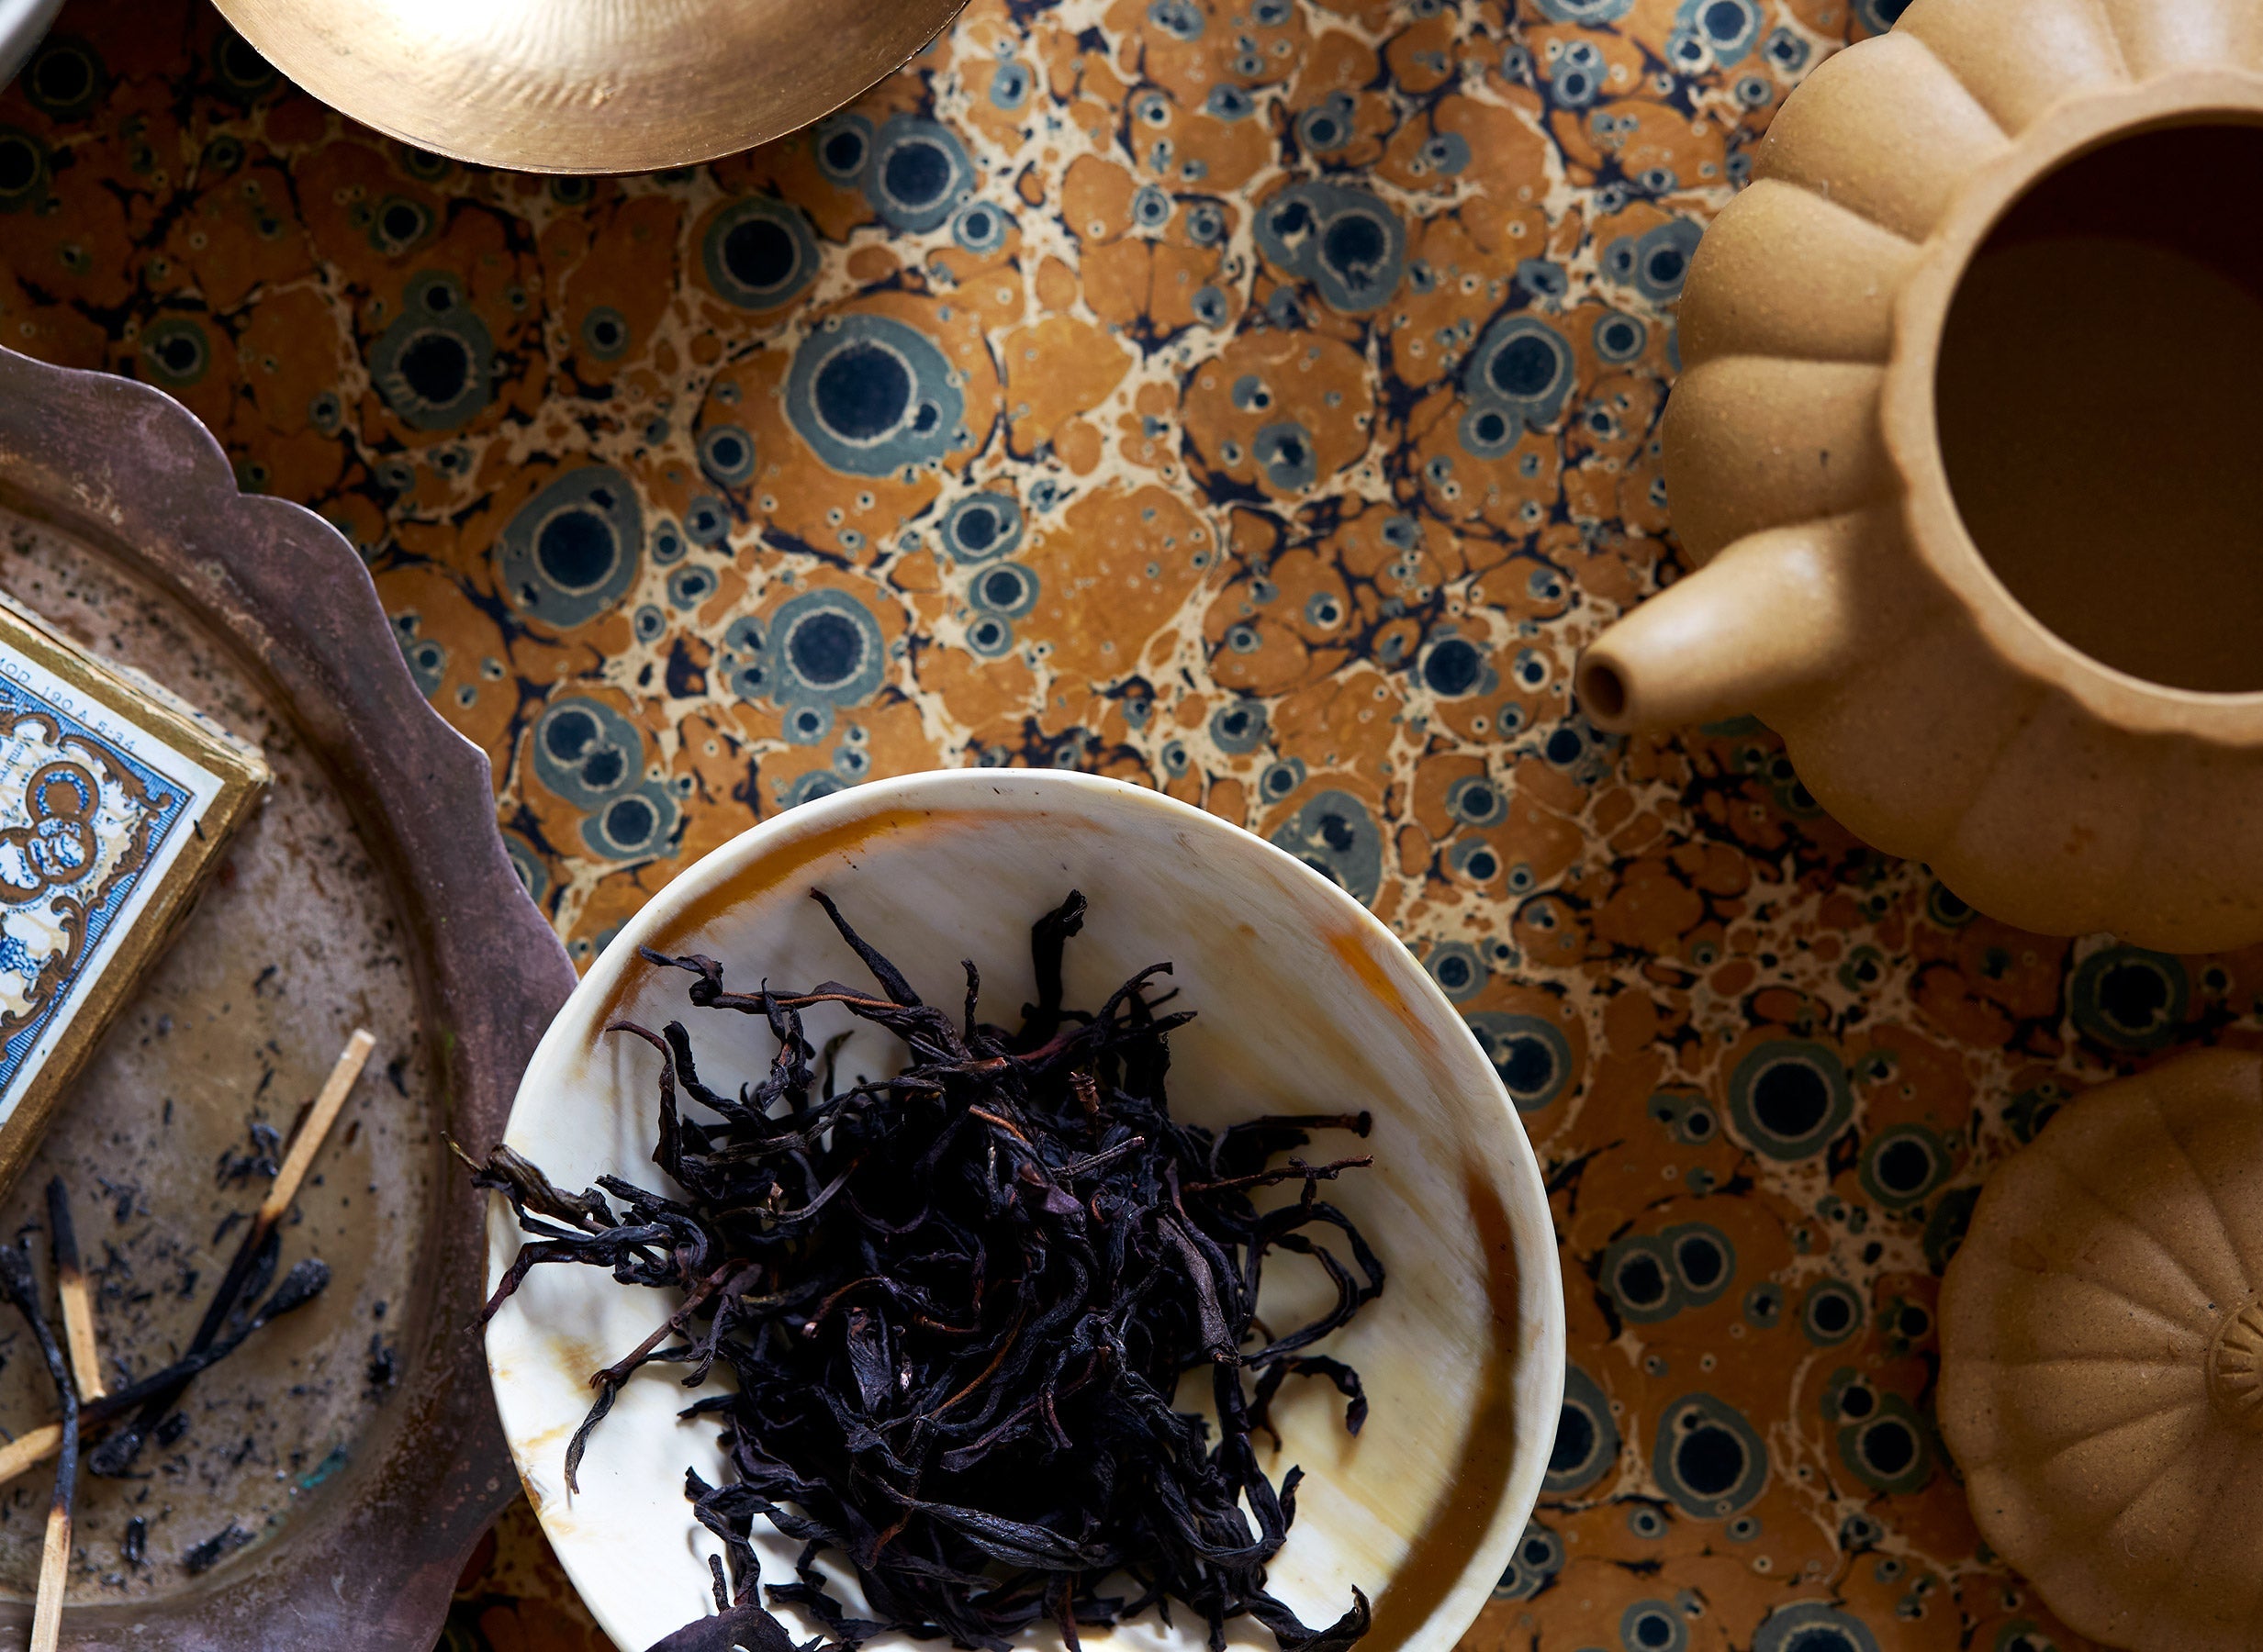 Discover premium loose leaf oolong tea from BELLOCQ and elevate your everyday rituals. Free U.S. shipping available.